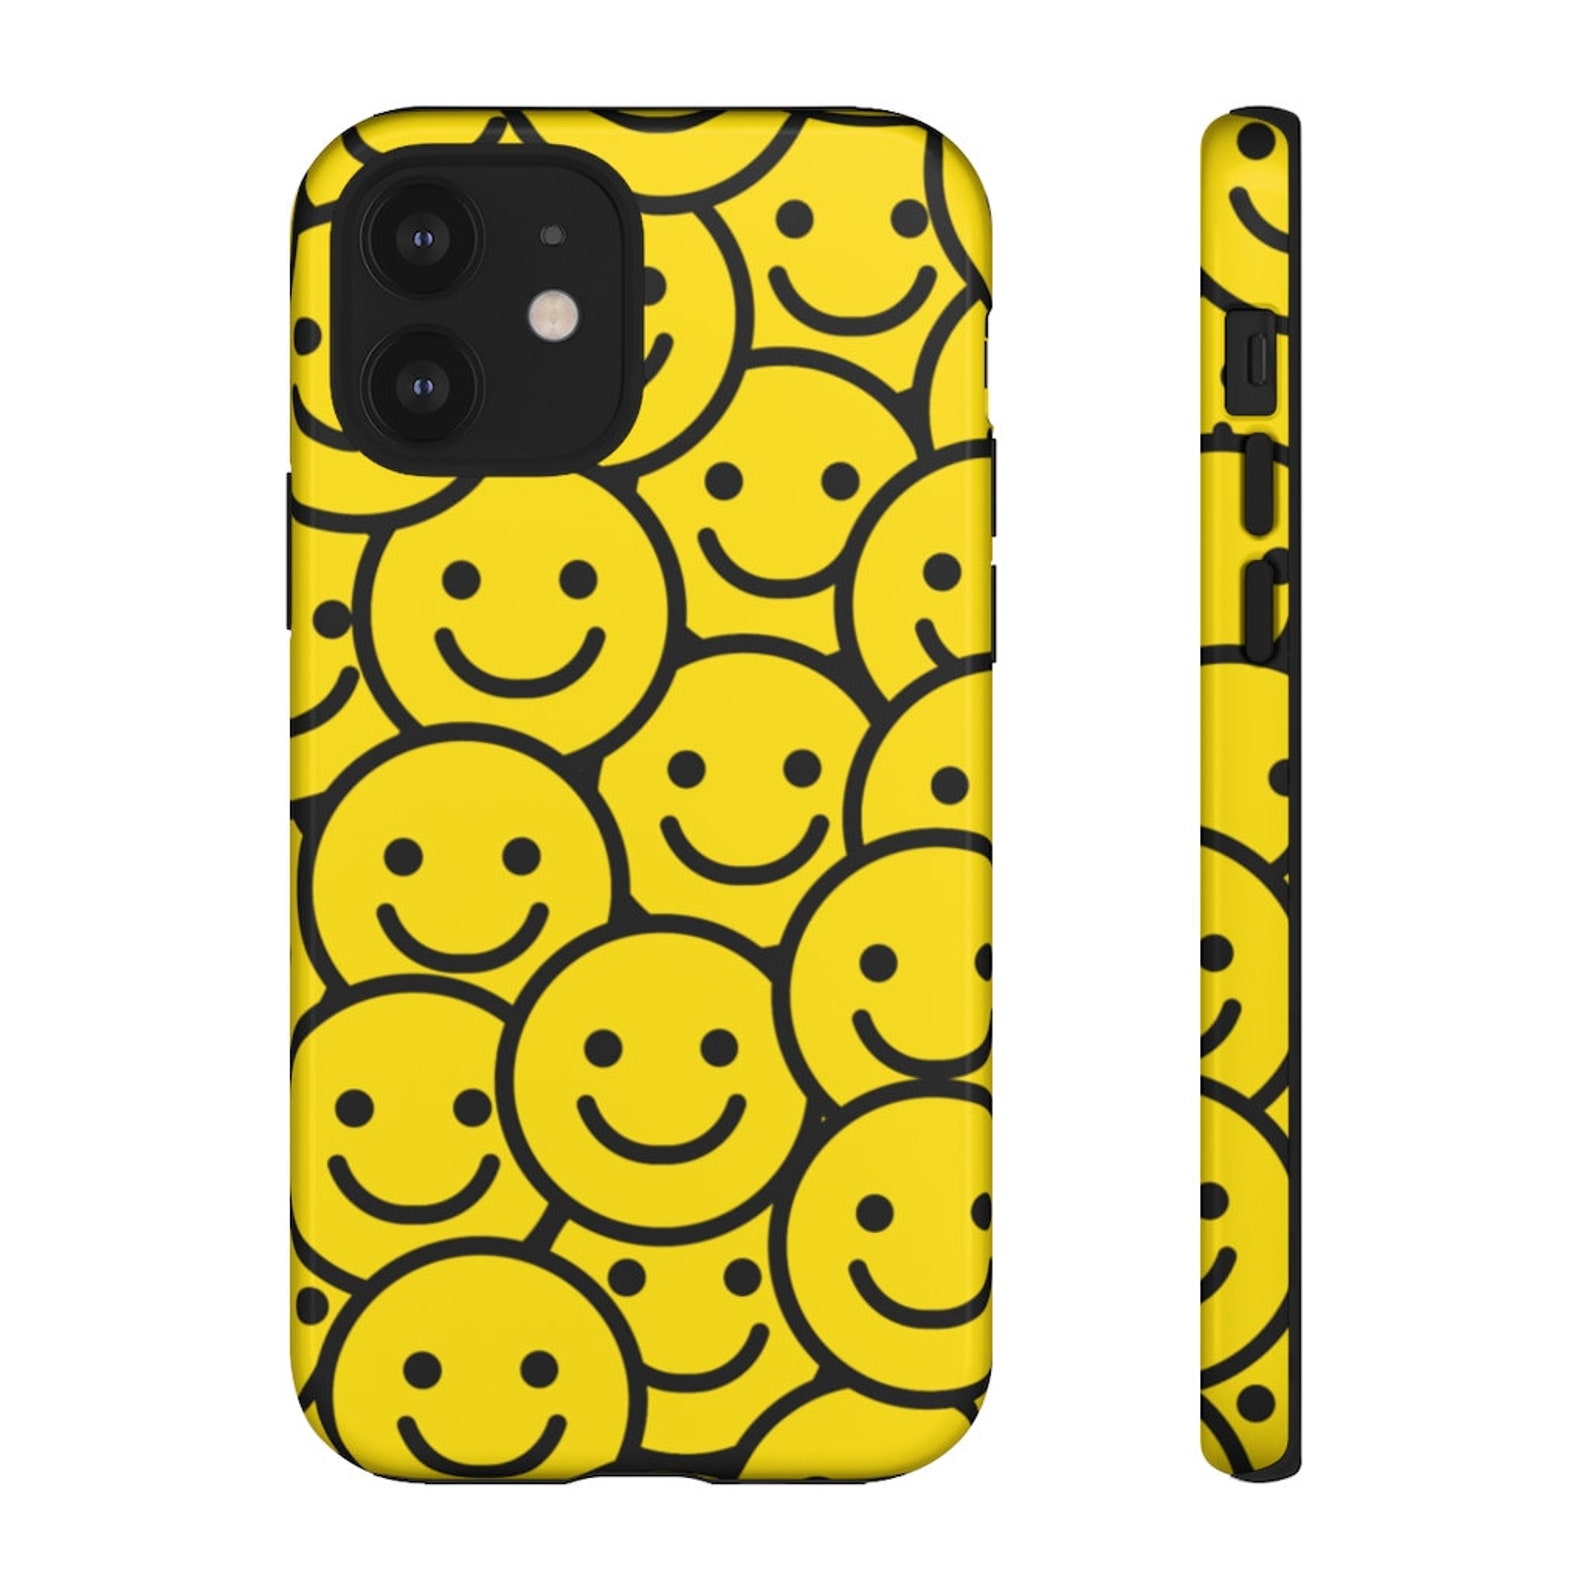 Smiley Face iPhone Case Yellow Iphone 12 Case Smile Face | Etsy